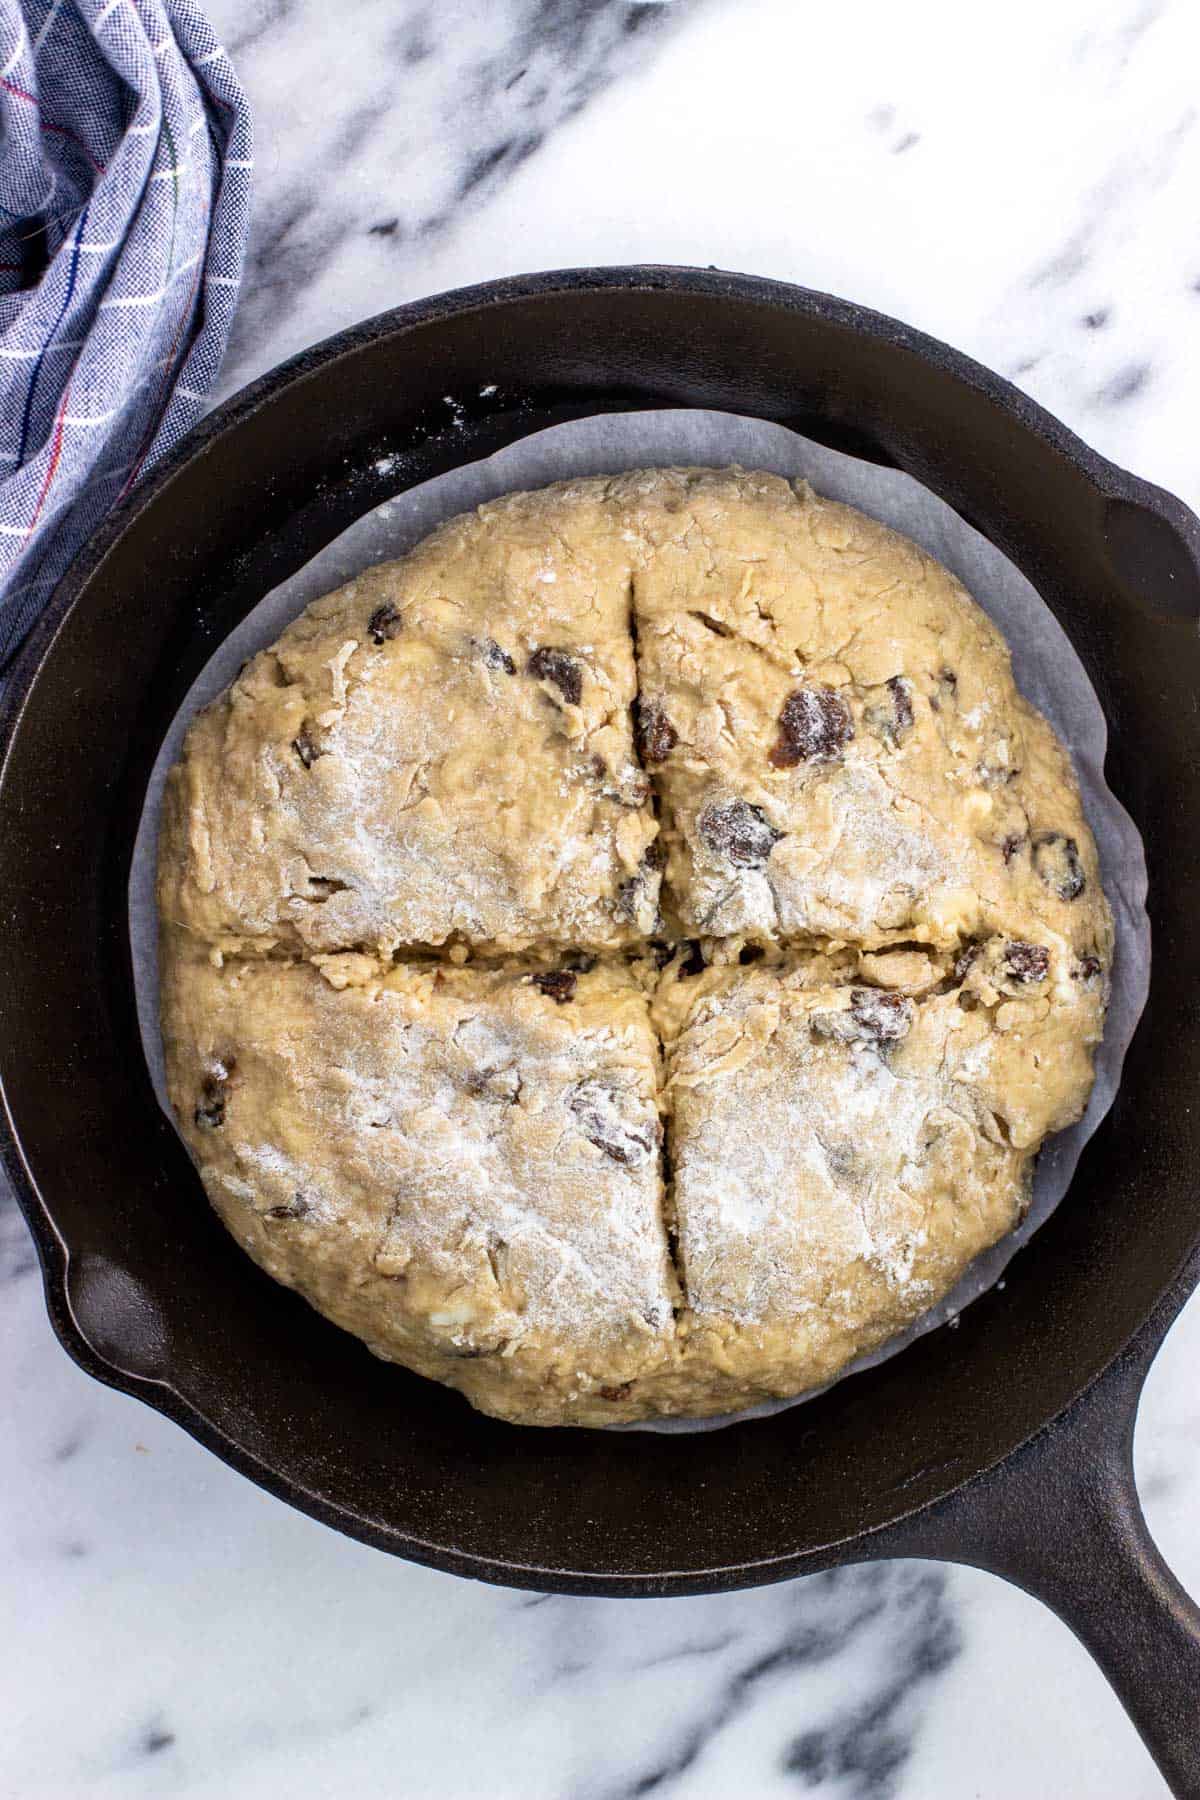 Irish soda bread dough with a cross cut into the top transferred to a cast iron skillet.